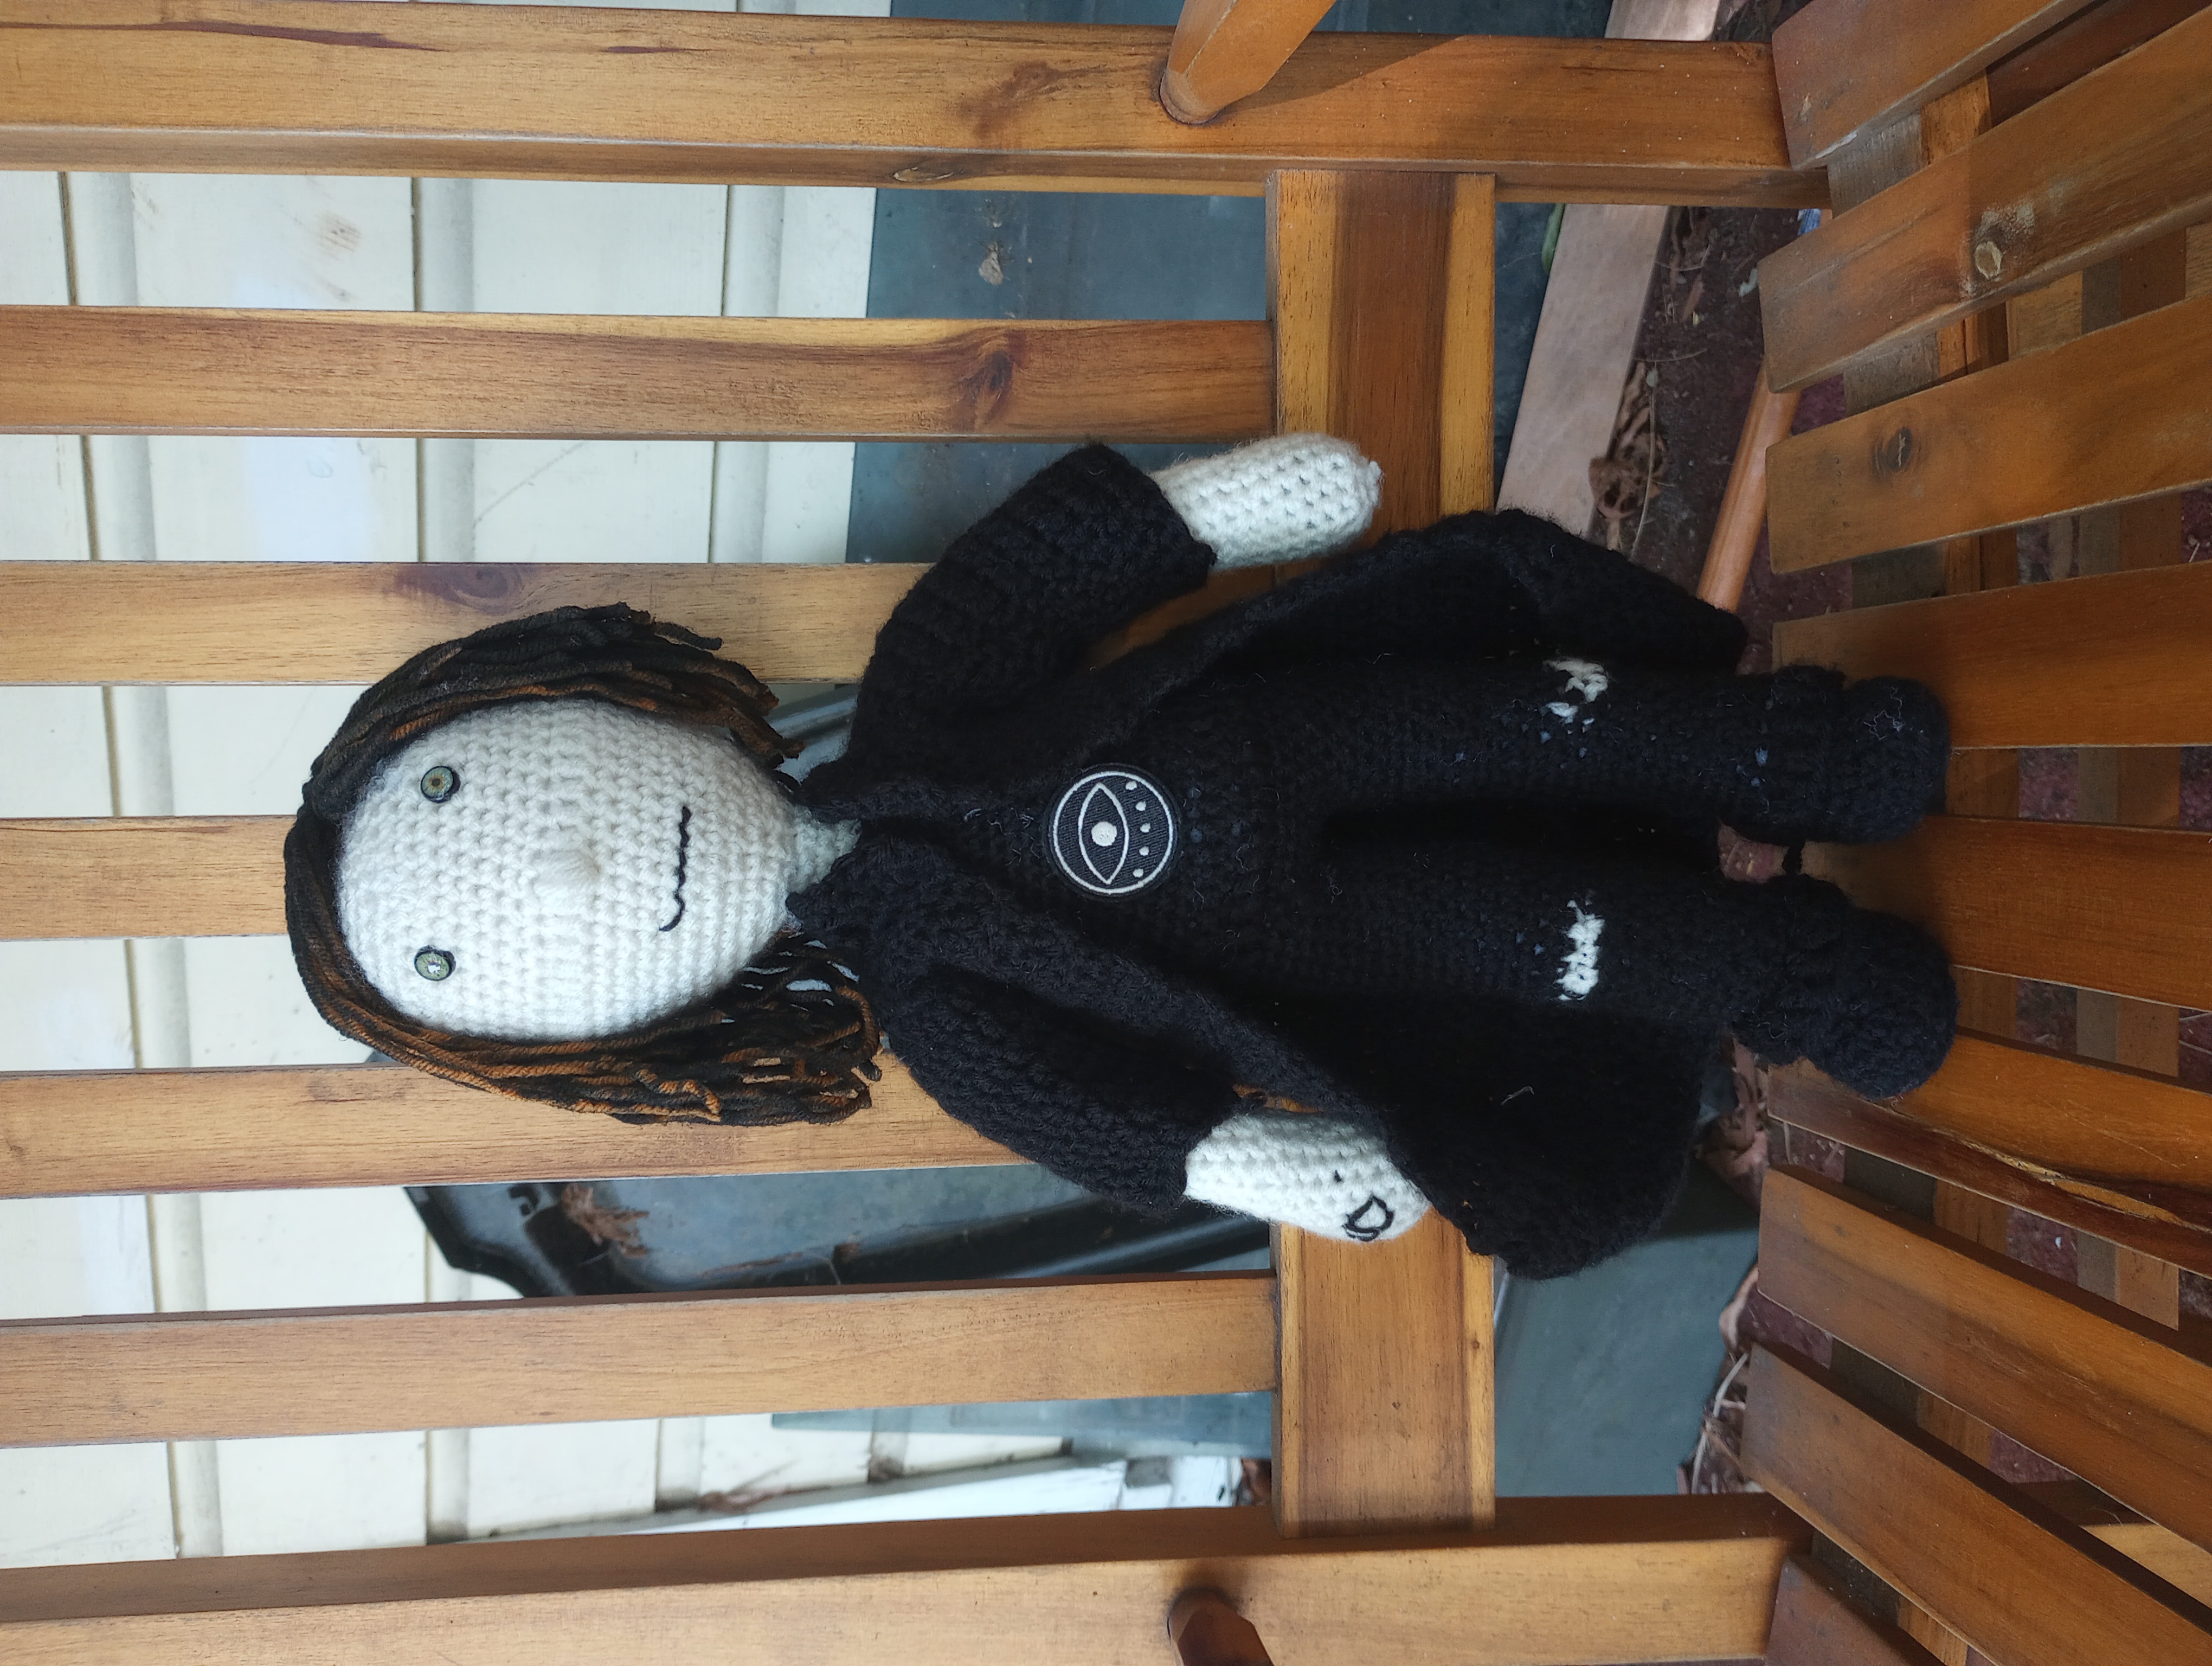 A crocheted doll with a white face and hands, black shirt, pants, and trench coat, hazel eyes, hair made of orange yarn spray-dyed black, and a patch of an eye on the shirt